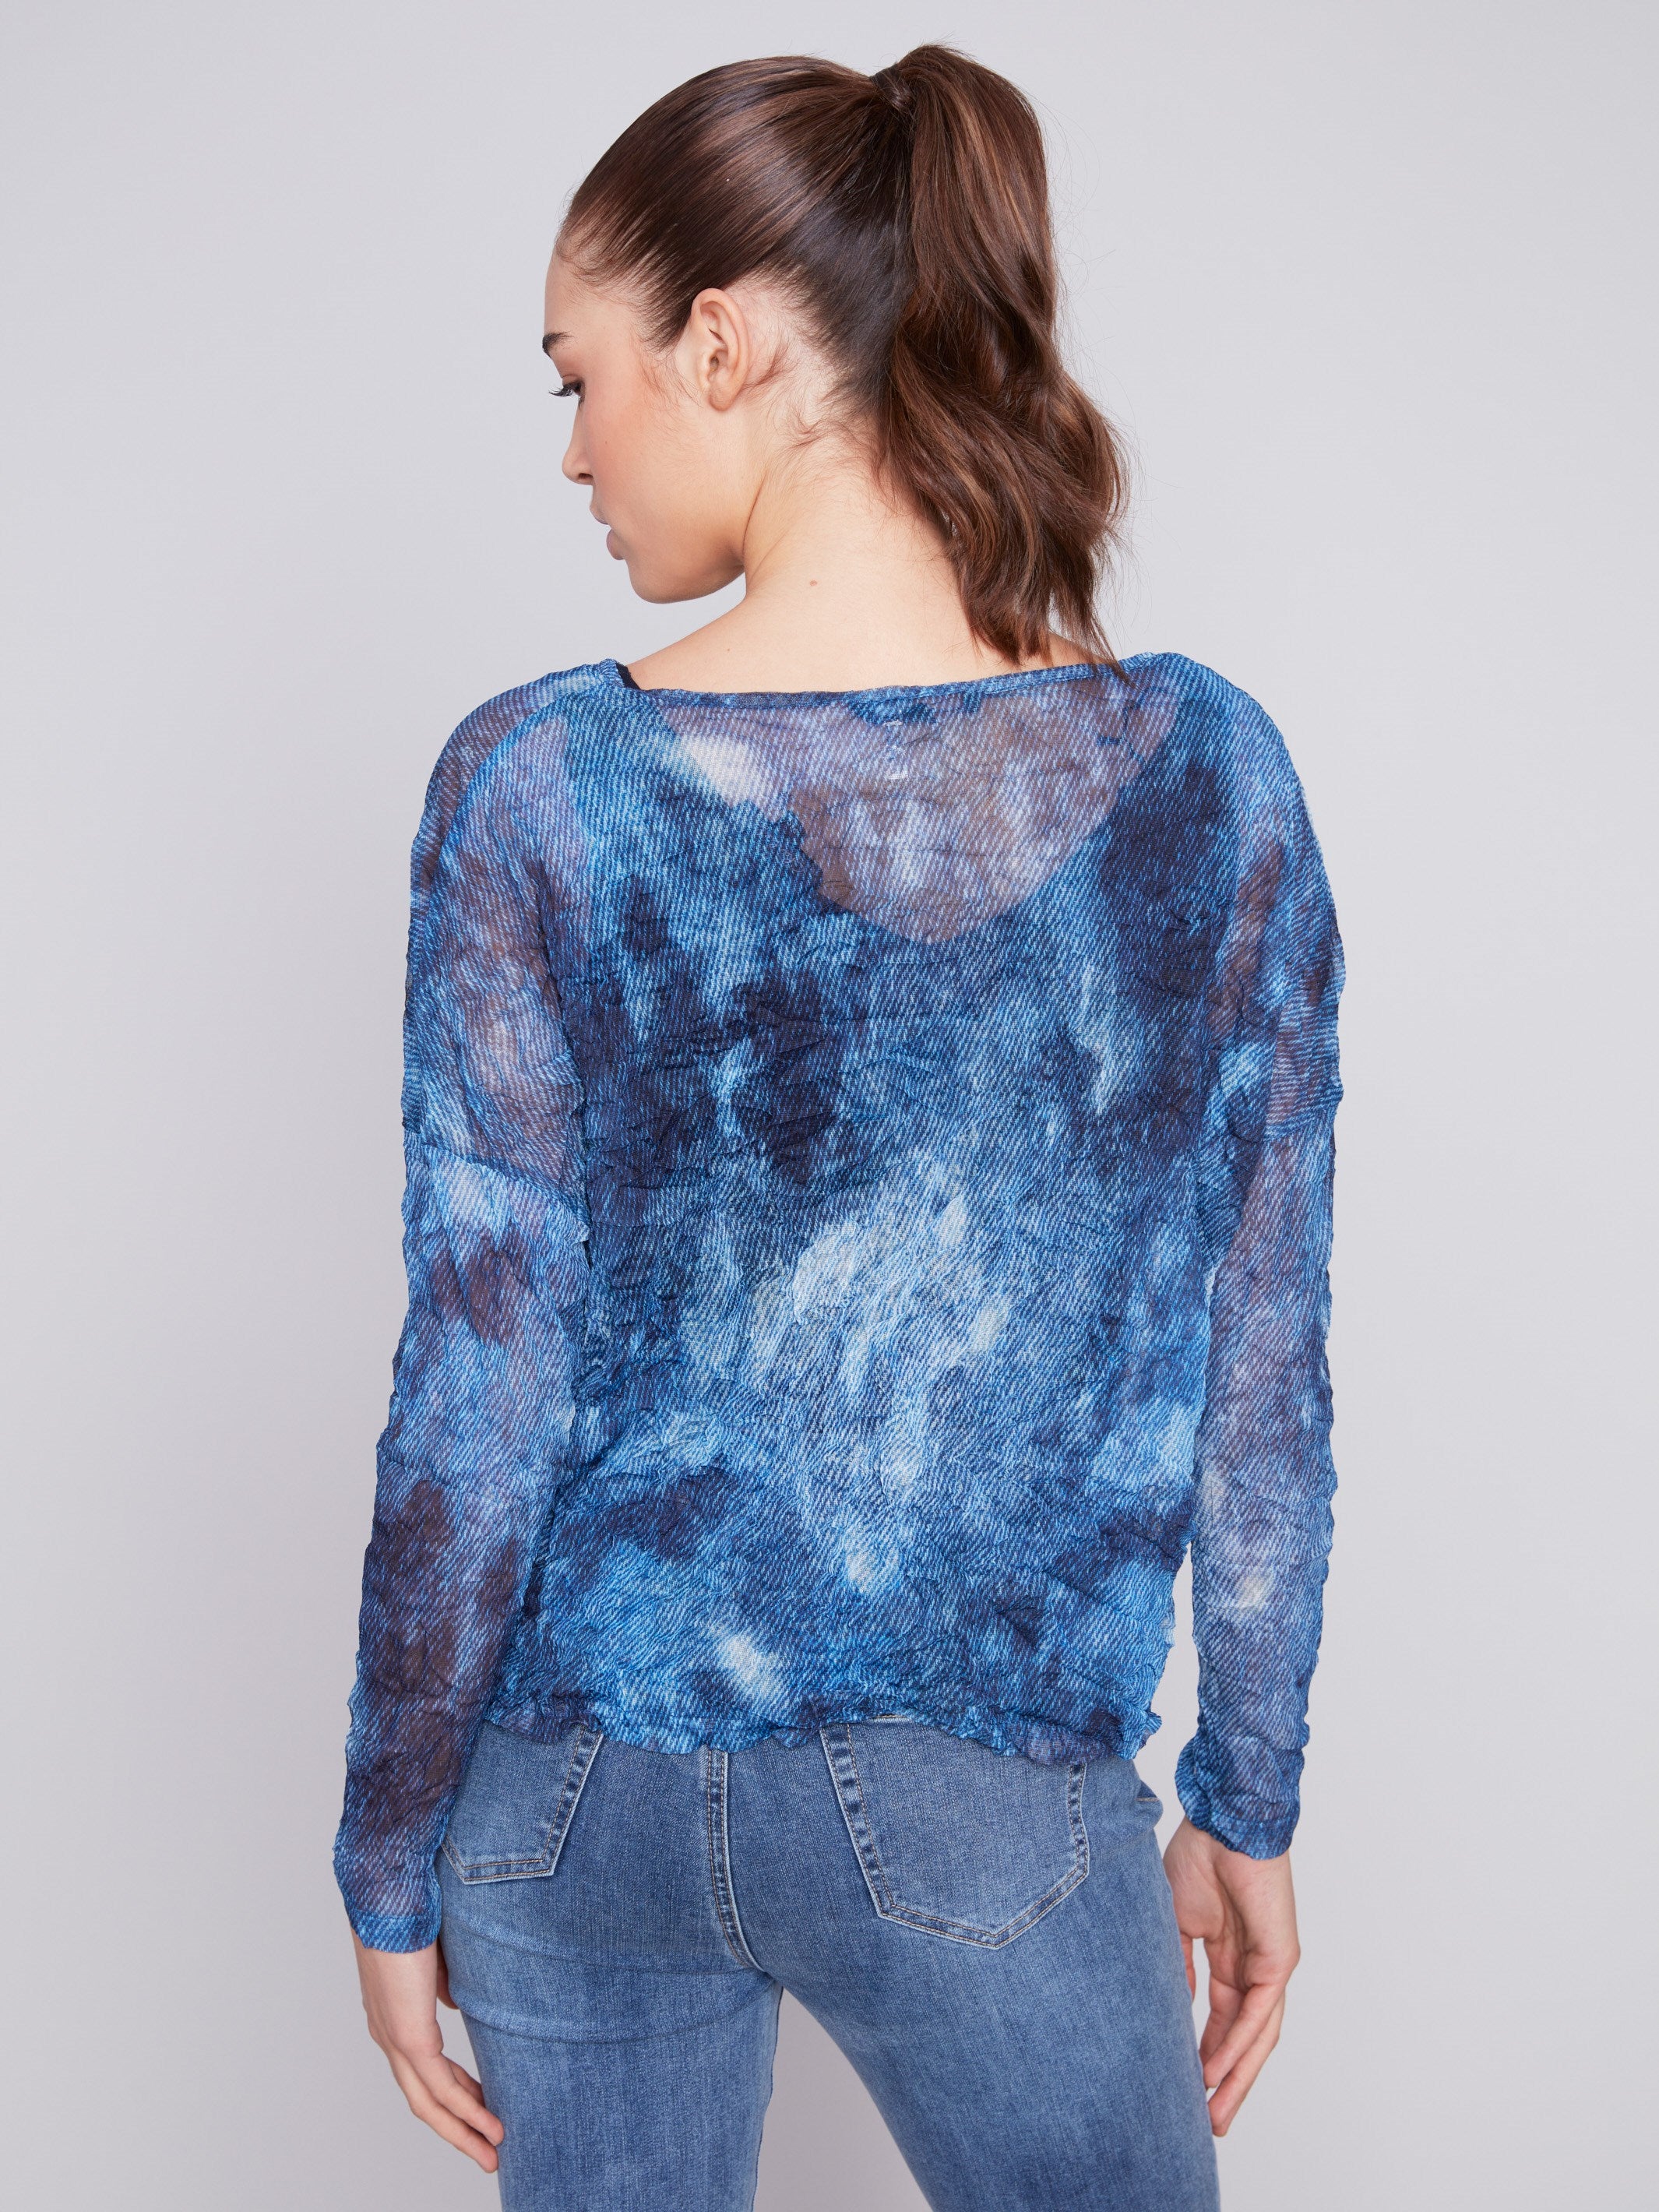 Printed Crinkle Mesh Top - Denim - Charlie B Collection Canada - Image 2